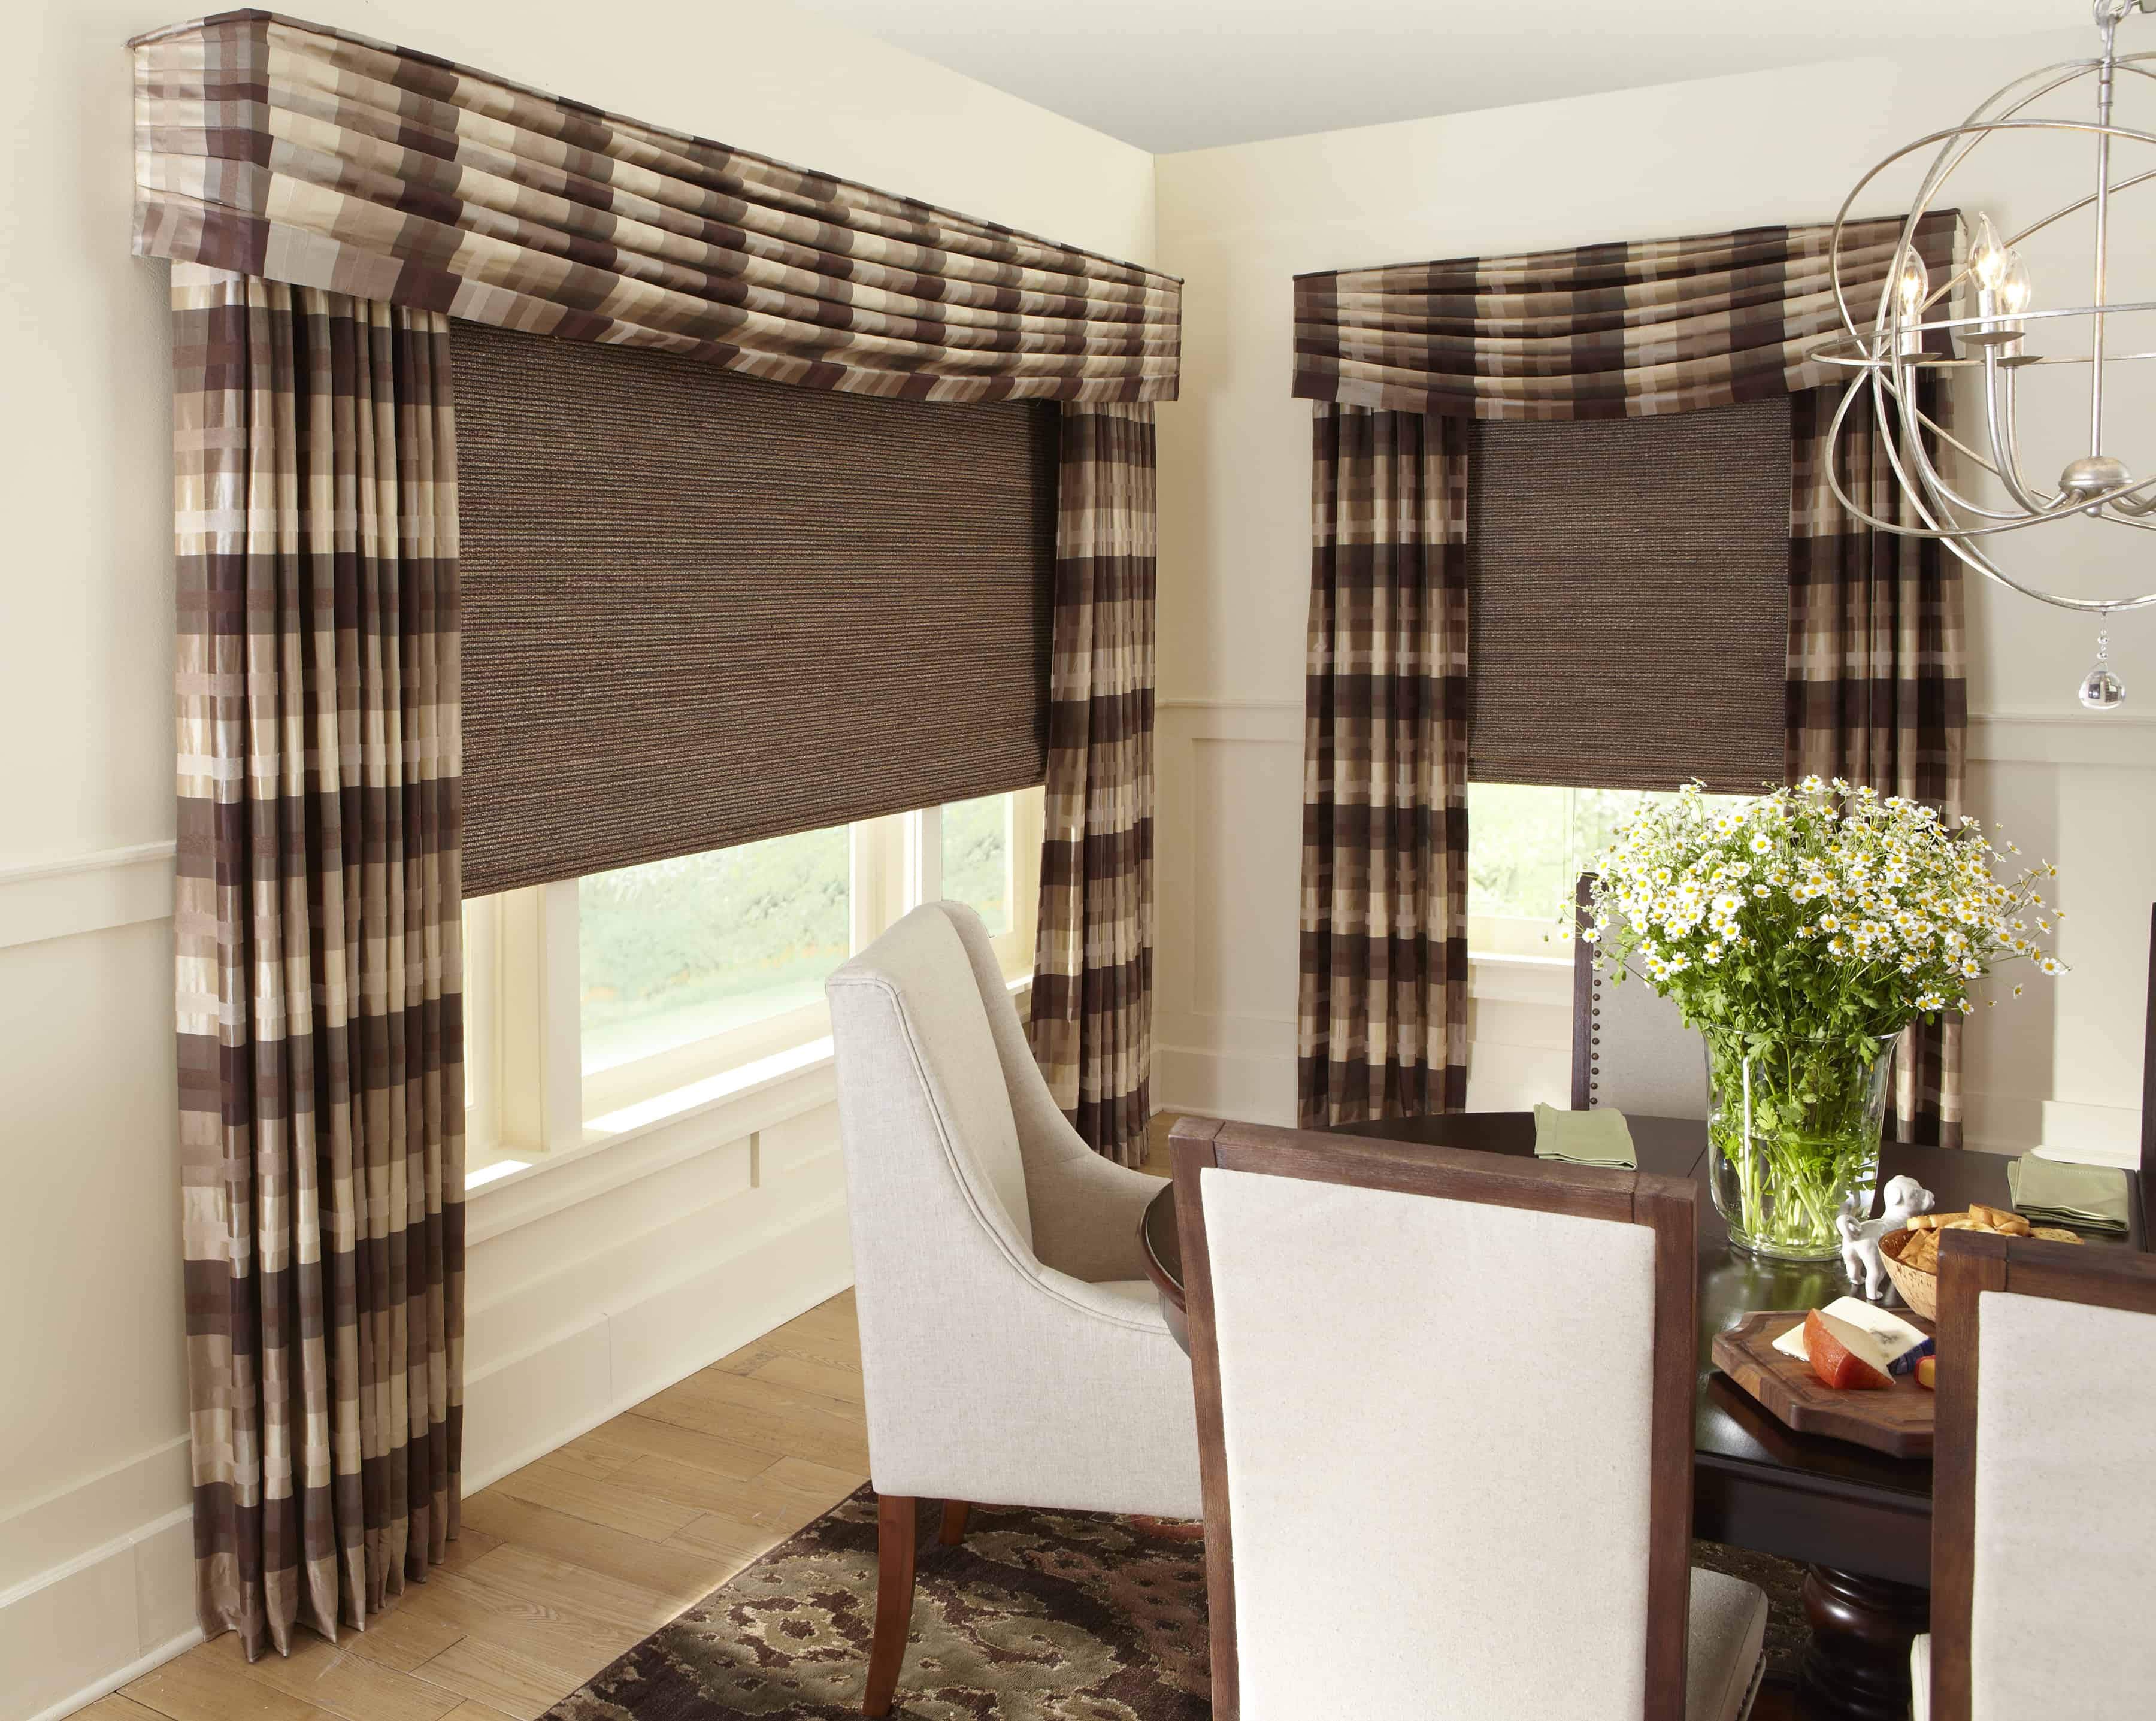 plaid patten draperies in dining room